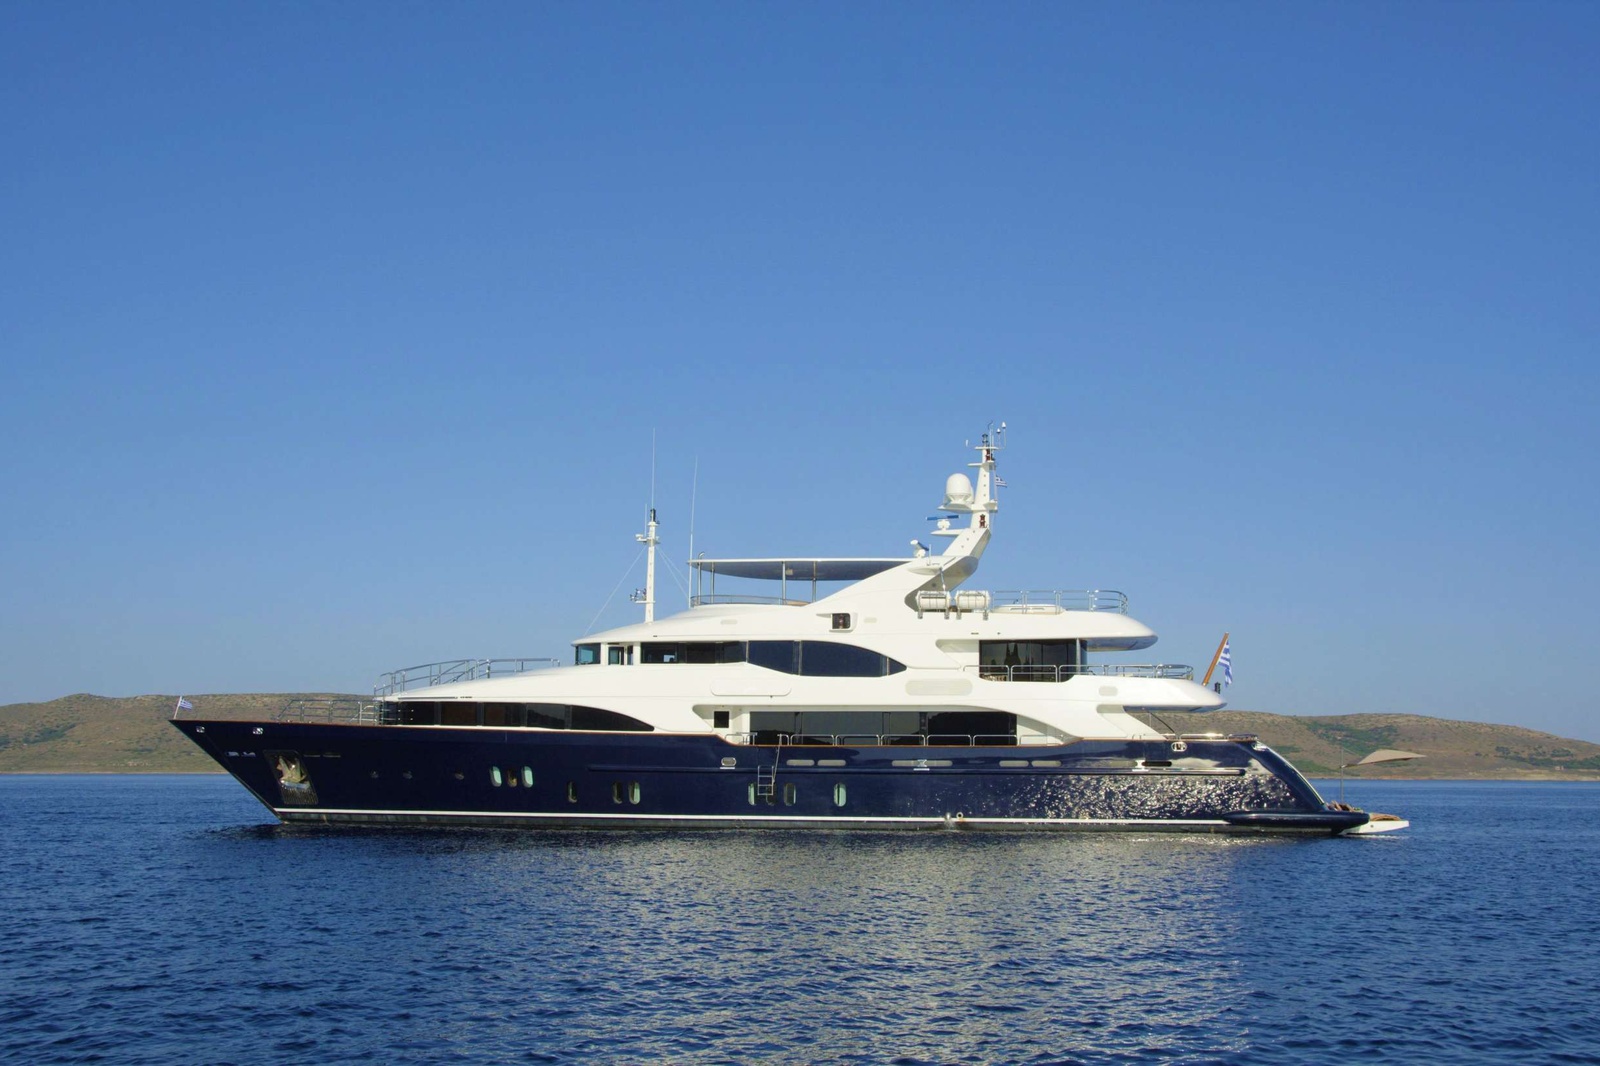 360 Virtual Tour: https://www.digitalimages.gr/panoramata/GrandeAmore/GrandeAmore.html

GRANDE AMORE is a stunning 44 meter, Benetti 145 Vision built in 2006 and last refitted in 2020, based in Greece.
Her Key Features are: 6 cabins (2 Masters with private terraces), BEACH CLUB, JACUZZI on deck, STABILIZERS (Zero Speed & Underway), ELEVATOR to 3 decks, WHEELCHAIR Accessibility, 2nd Escort TENDER boat (10m) & many other Special Features.
Full ABS classed boat with a beam of 9.3m and a draft of 2.7m, she has a GRP hull and superstructure and top cover and can accommodate 12-14* guests in 6 cabins.
Her STABILIZERS (Zero Speed & Underway) offer her great stability in rough seas.
GRANDE AMORE has been built to the highest standards of the industry by the world famous Benetti shipyard and boasts an elevator connecting the 3 decks.
The elevator is a unique option that is not found in many yachts. This makes getting around this Tri-Deck something of ease for any person having mobility problems or any type of handicap.
Refitted extensively in 2015, 2017, 2020, GRANDE AMORE has a modern style throughout with interior design by Francois Zuretti and exterior by Stefano Righini.

Her contemporary decor accentuates the spacious feel through the yacht, as does the full-height sliding doors on both the main and upper deck.

The sophisticated cabin layout features a MASTER suite with fantastic 180 degree views, a private deck forward of the owners suite and an office room, which can be separated by the cabin to be used also as a common area.
The wonderful 2nd MASTER suite faces aft with a view throughout the stunning second deck circular SKYLOUNGE onto the deck offering an abundance of natural light. The SKYLOUNGE can be either joined to the cabin or totally separated by a door, to be used also as a common area.

The HUGE SUN DECK is a prime location for entertaining, partially shaded by a fixed Hard Top, it features a fully equipped bar, large pool JACUZZI, table for al fresco dining and areas to sunbath.
The massive garage accomodates a Castoldi jet tender J15, jet skis, dive/snorkel equipment & other toys very nicely.
When at anchor the garage transforms to a stunning BEACH CLUB with a sauna, gym equipment and an Ultra- Large 
SWIMMING PLATFORM (opening - 14 sq. meters).

BEACH CLUB DIMENSIONS (total): 36 sq. meters.
BEACH CLUB interior = 22 sq.meters (5m x 4.4m) + SWIMMING PLATFORM = 14 sq.meters (3.2m x 4.4m))

She is powered by 2 Caterpillar engines of 1300 hp each, giving her a maximum speed of 16 knots and a cruising speed of 14 knots.